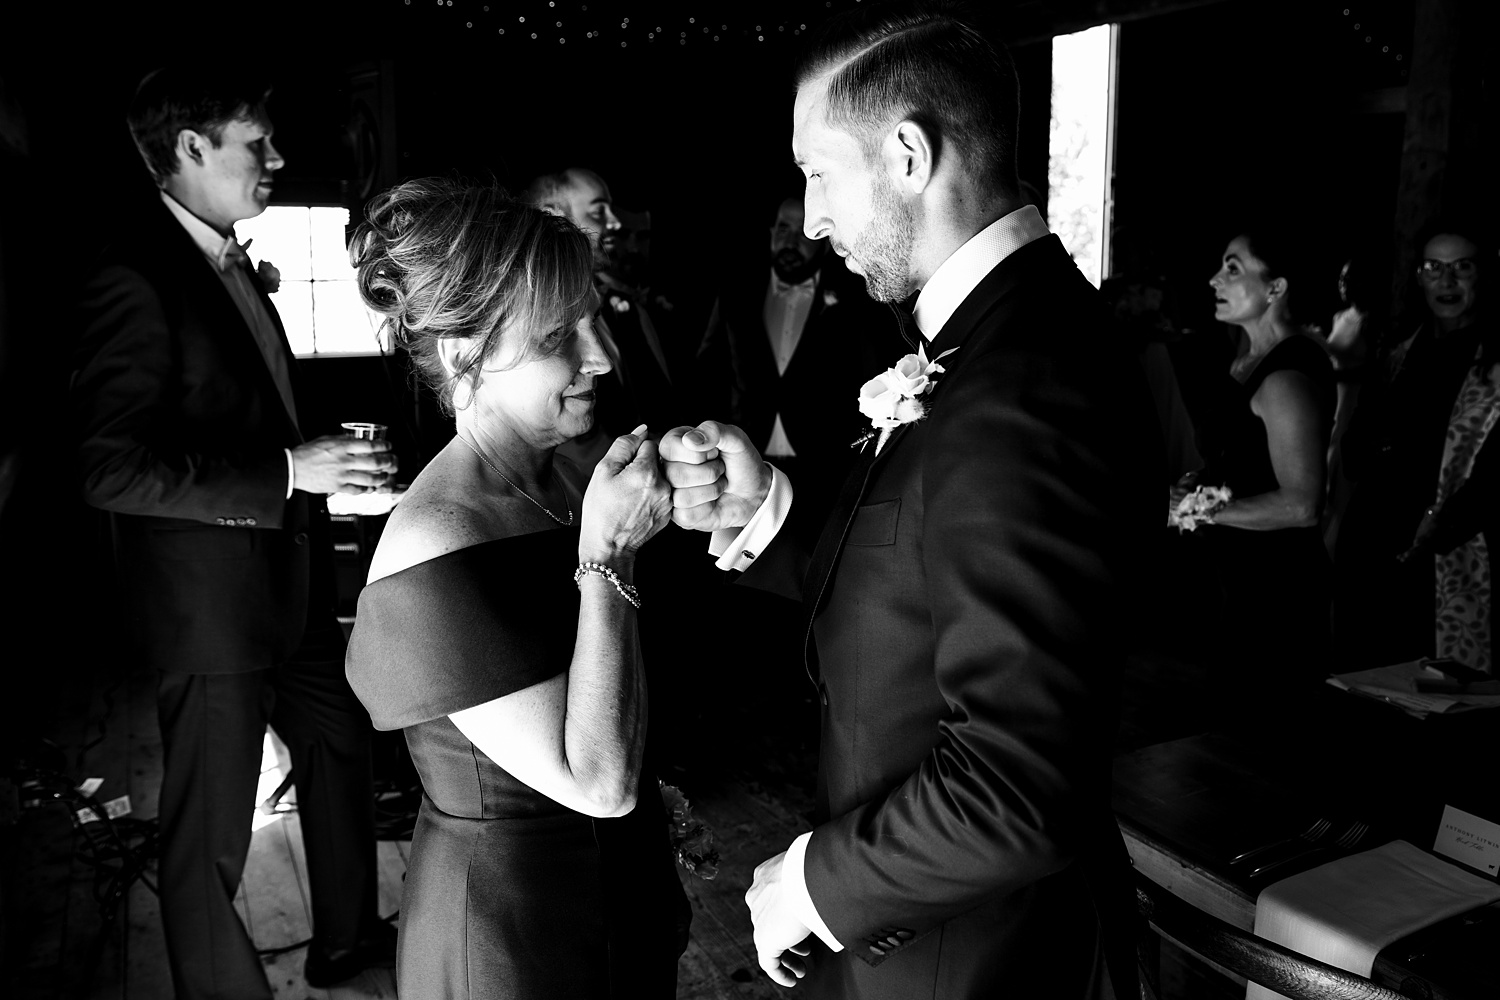 A fist bump between the groom and his mom